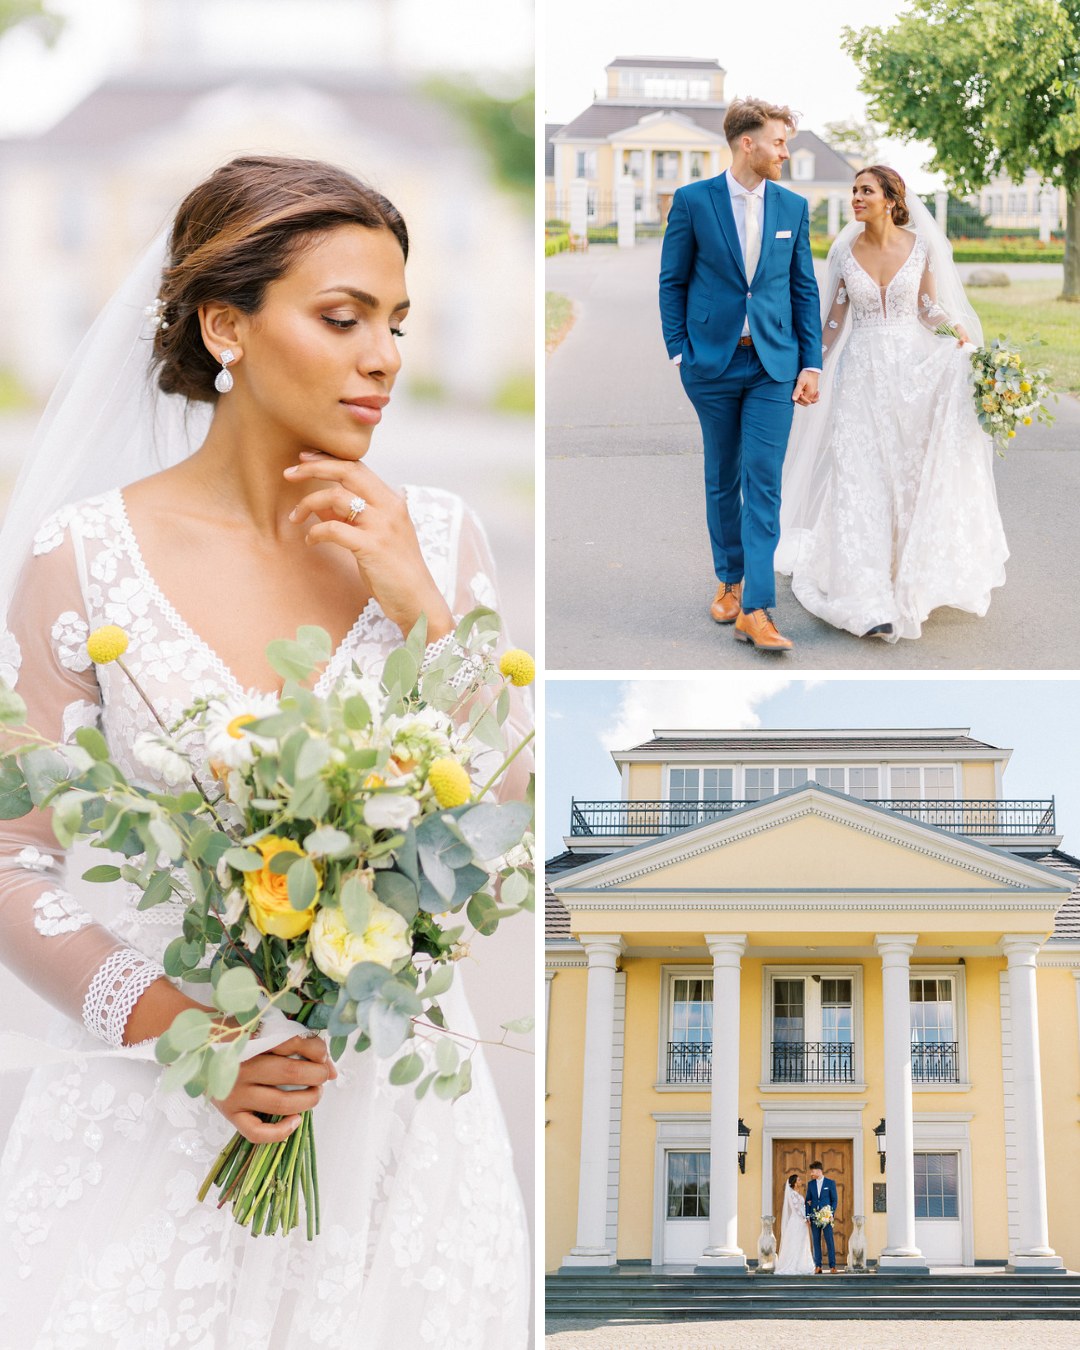 Collage of couple in wedding dress and tuxedo outside of wedding venue.